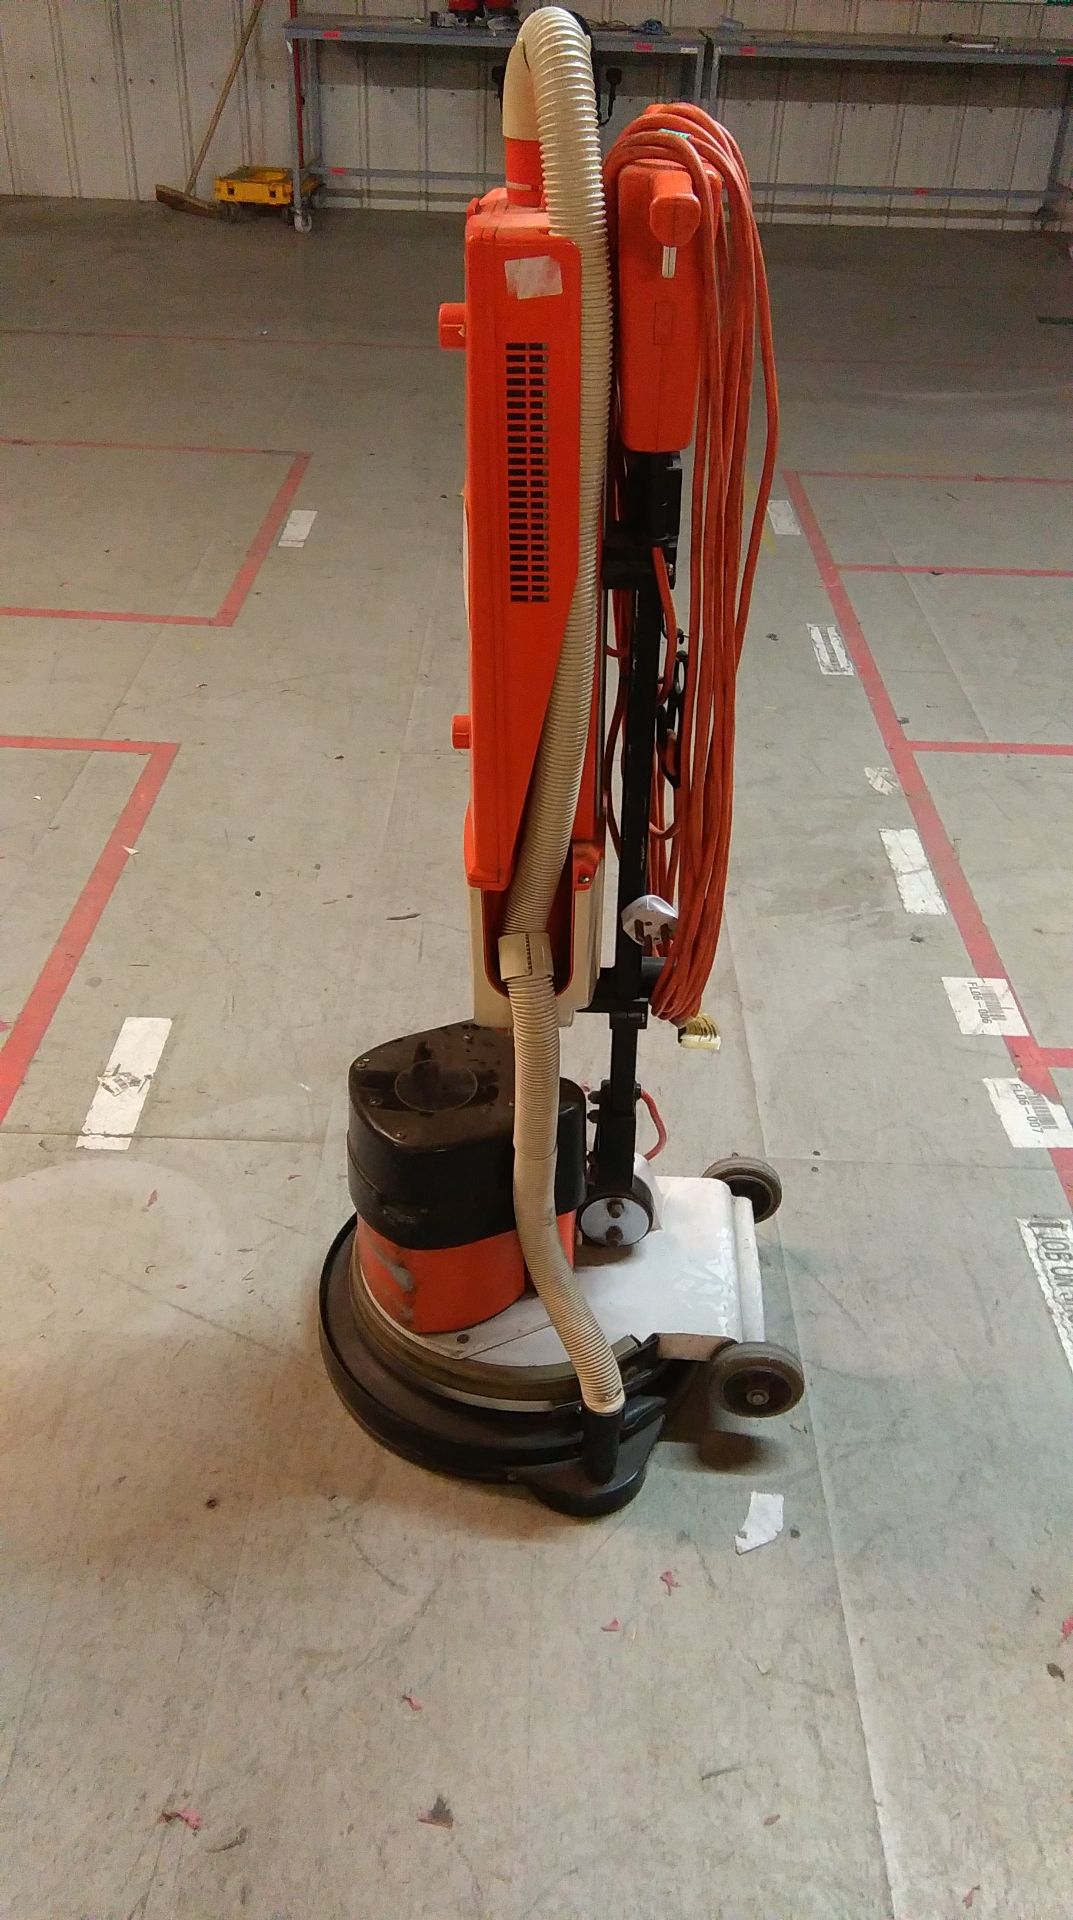 Jeyes Hygiene Rotary Floor Cleaning Machine for Hard Floors & Carpet Care - Image 2 of 2